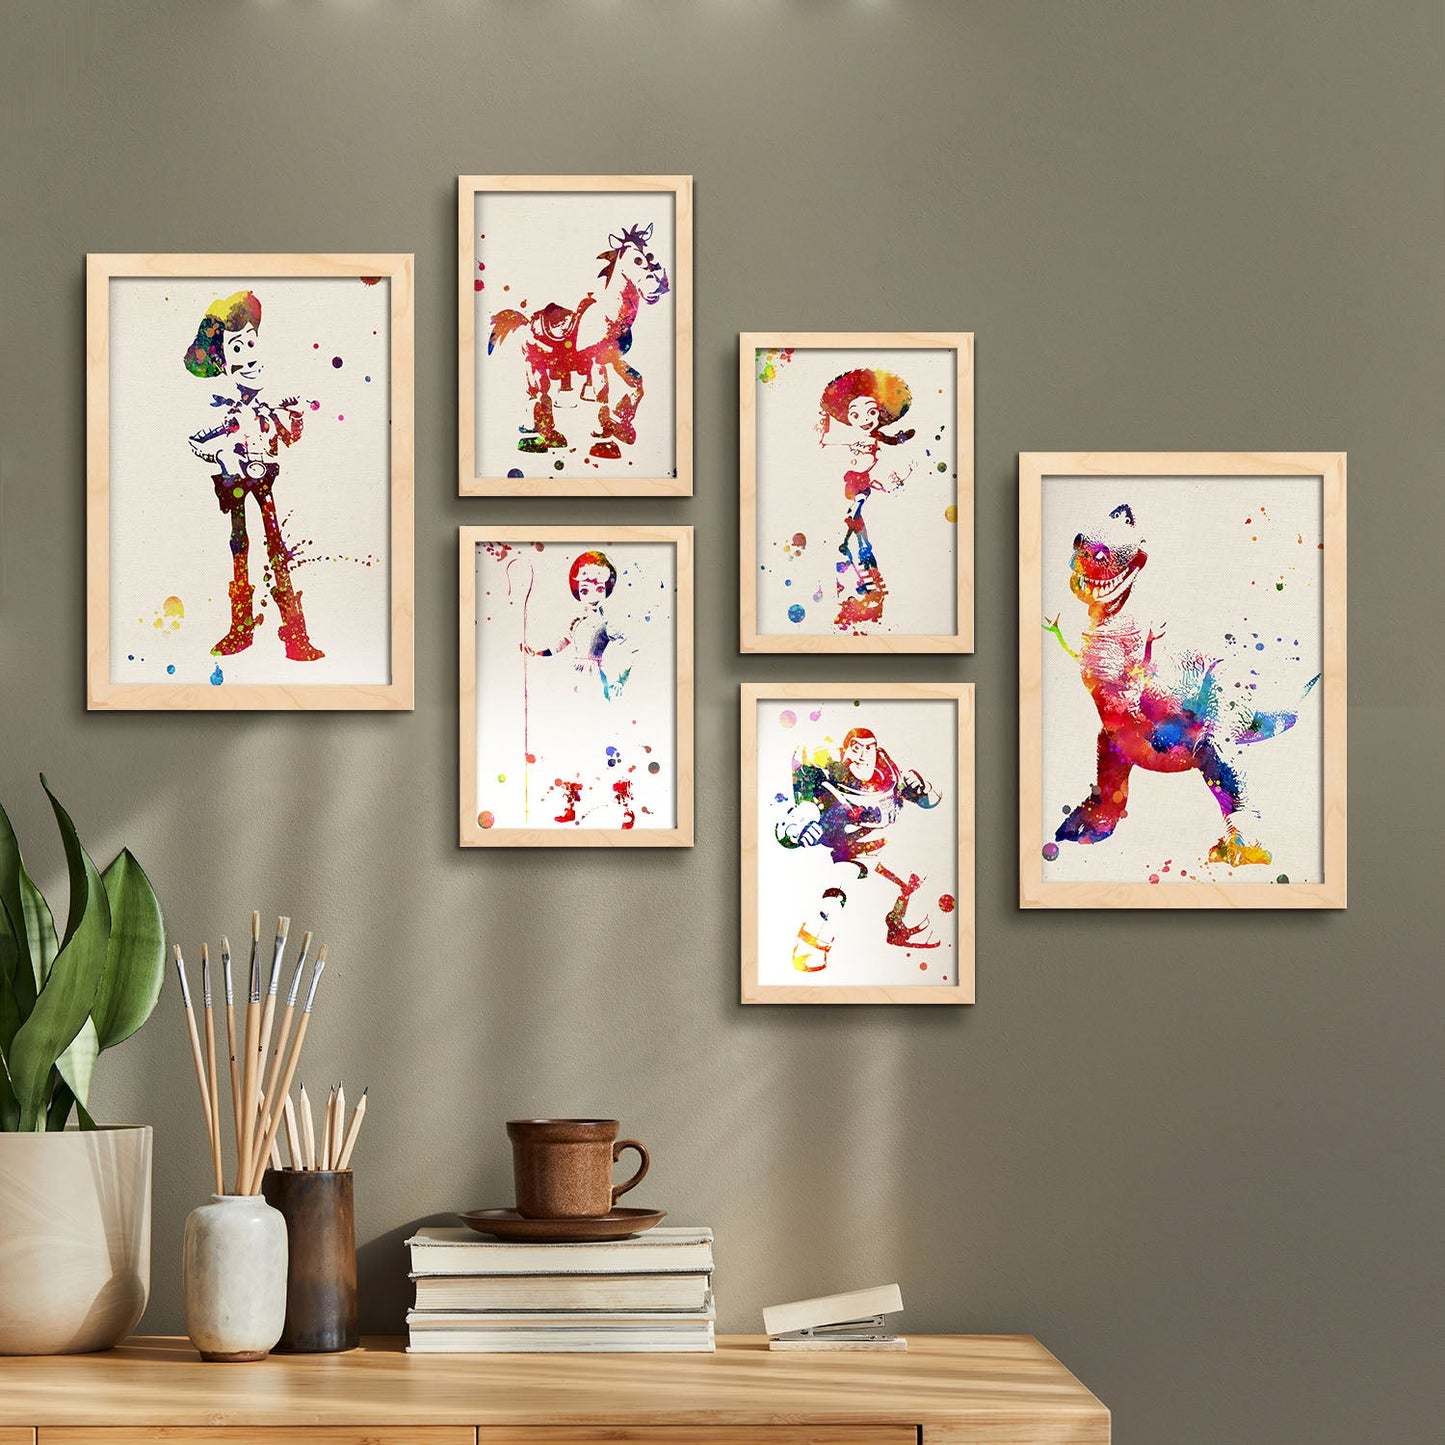 Nacnic toy sotry. Aesthetic Wall Art Prints for Bedroom or Living Room Design.